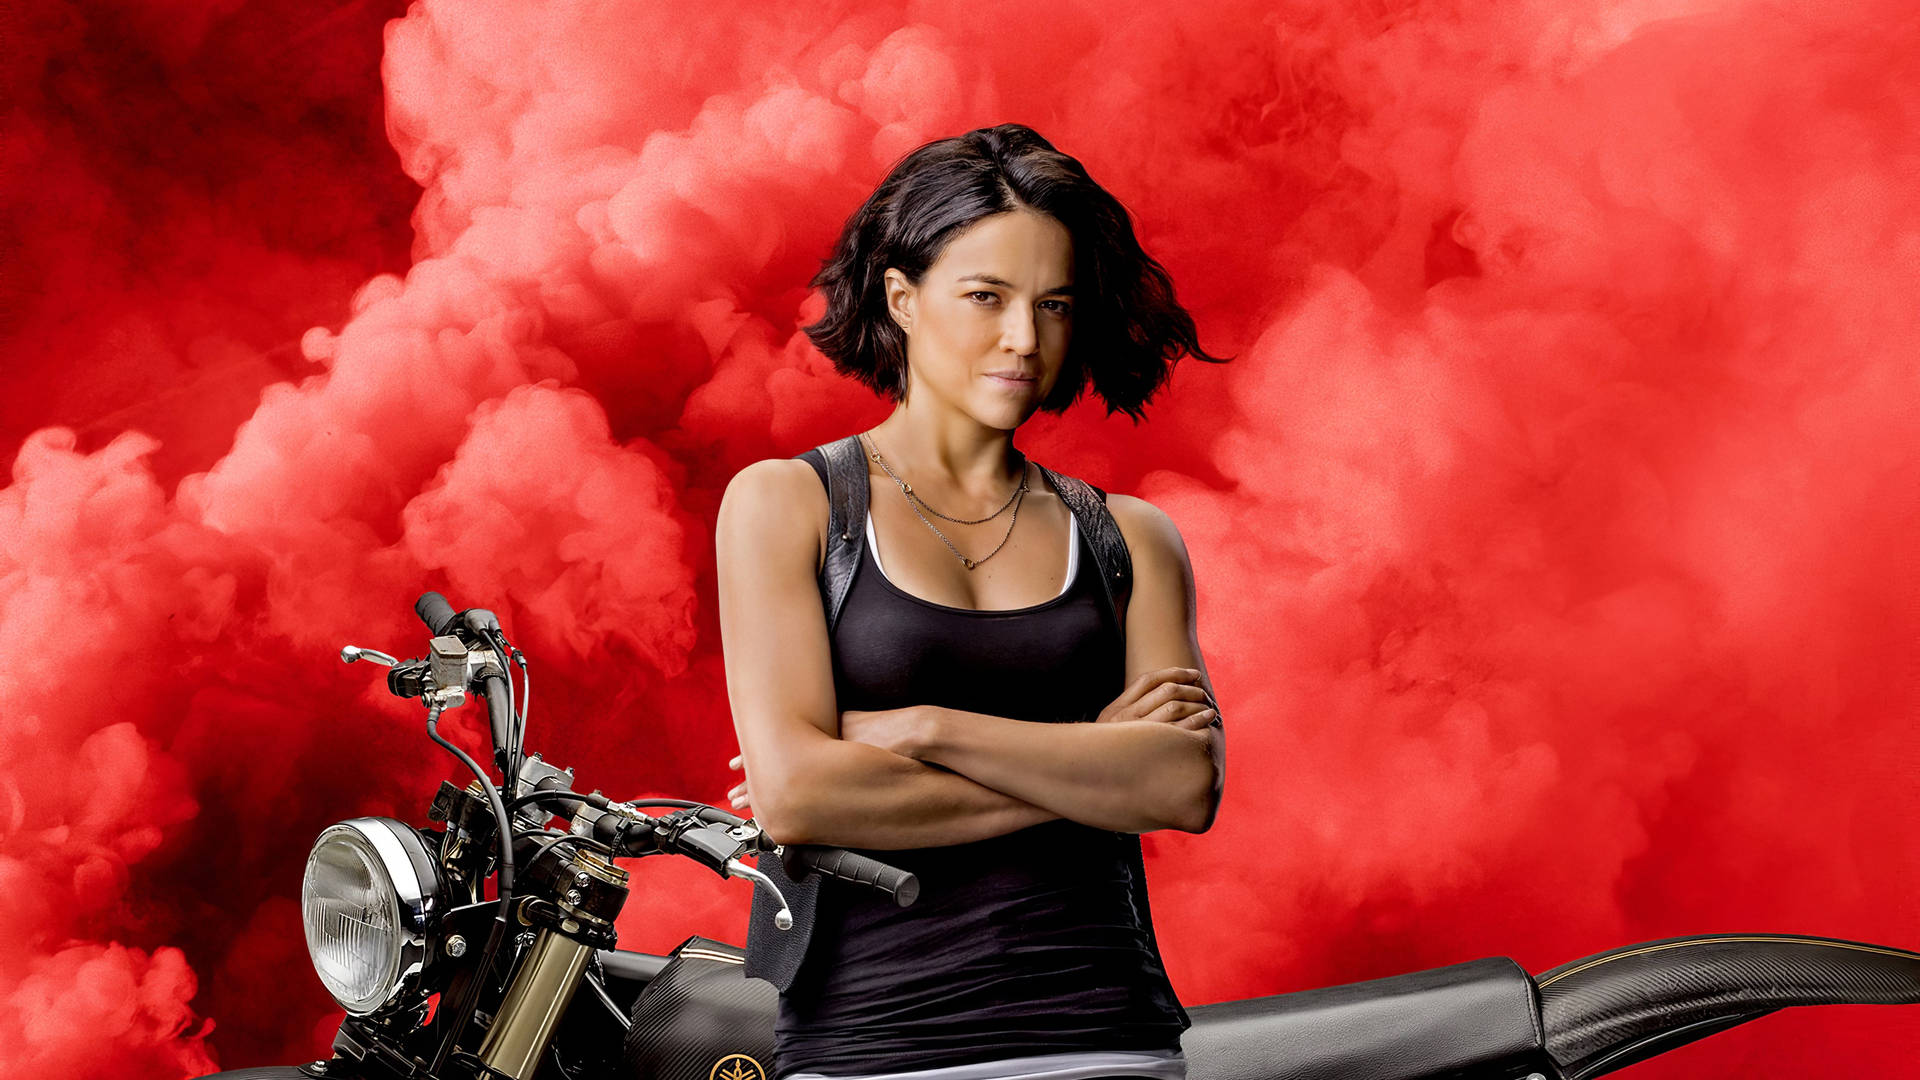 Michelle Rodriguez In Fast And Furious 9 Wallpaper